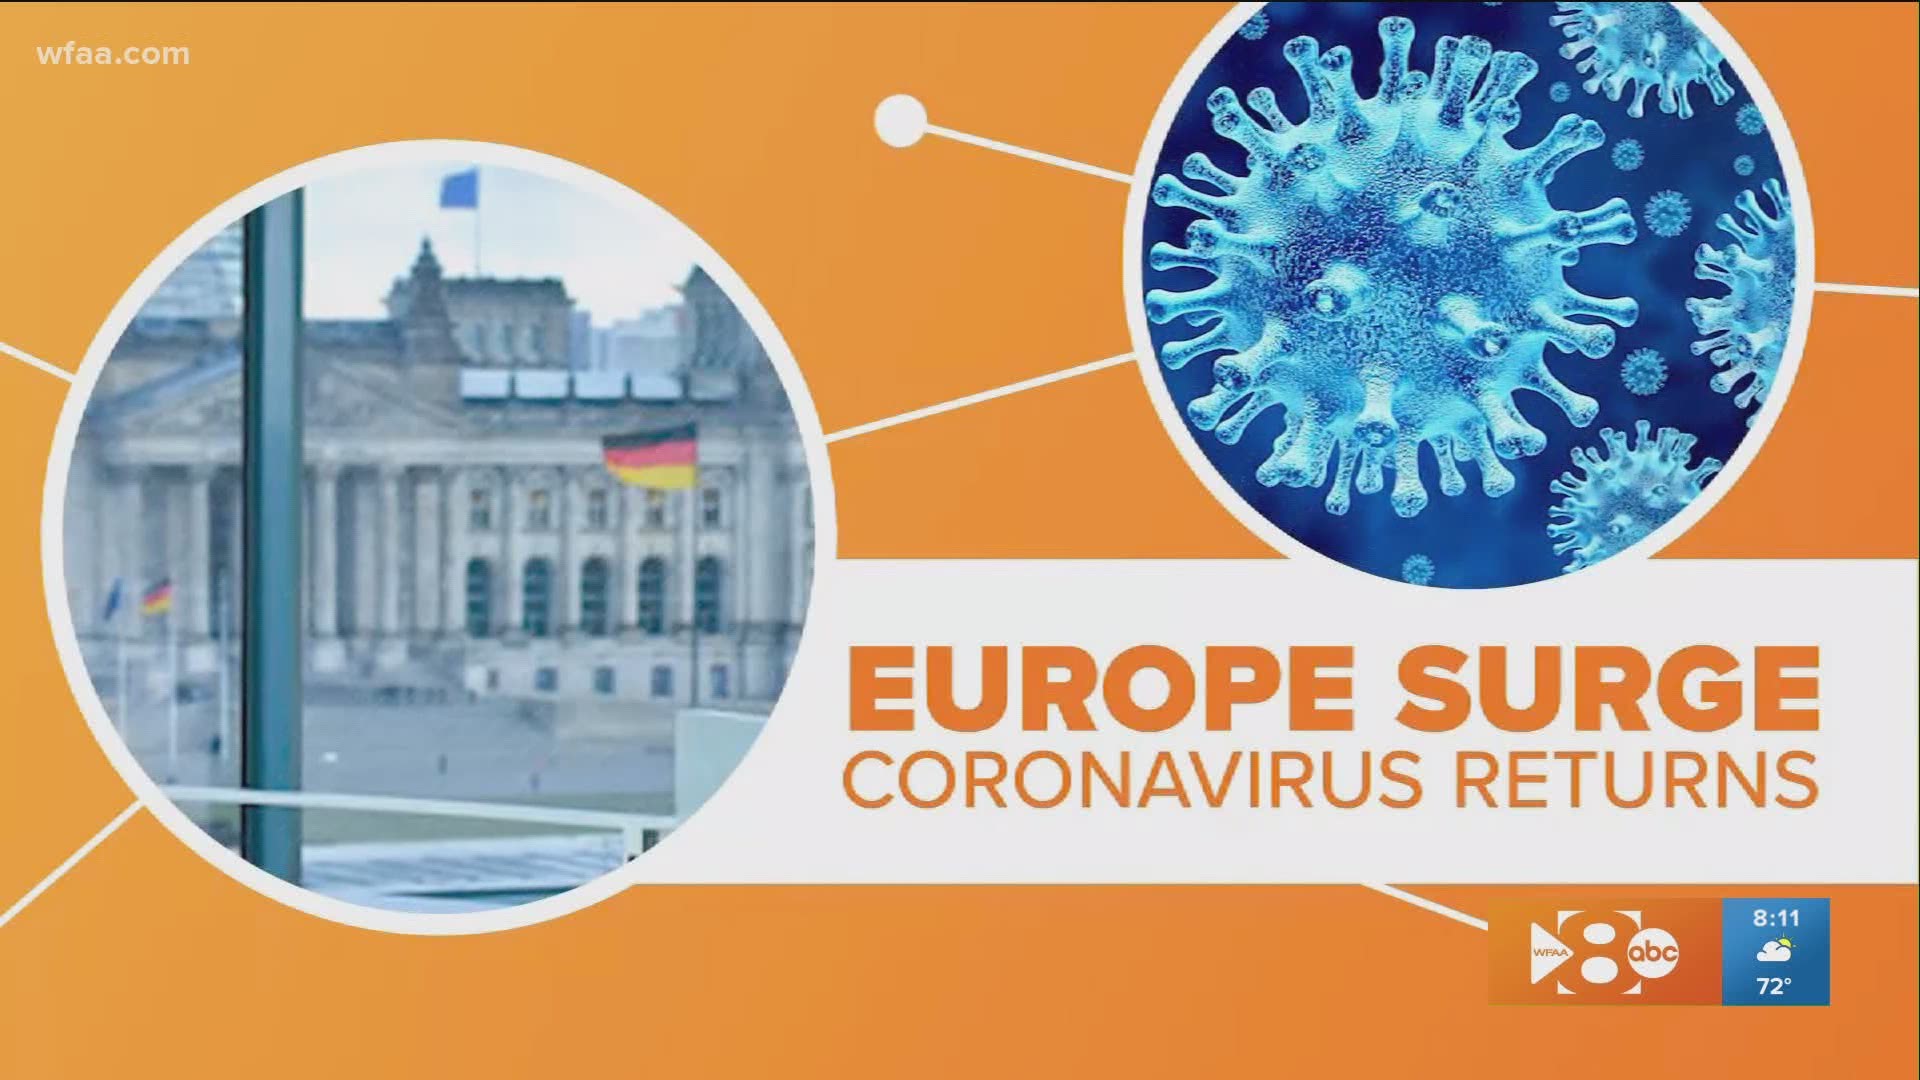 WFAA health reporter Sonia Azad connects the dots on the recent COVID-19 spikes in Europe. There is some positive news out of the recent upticks.